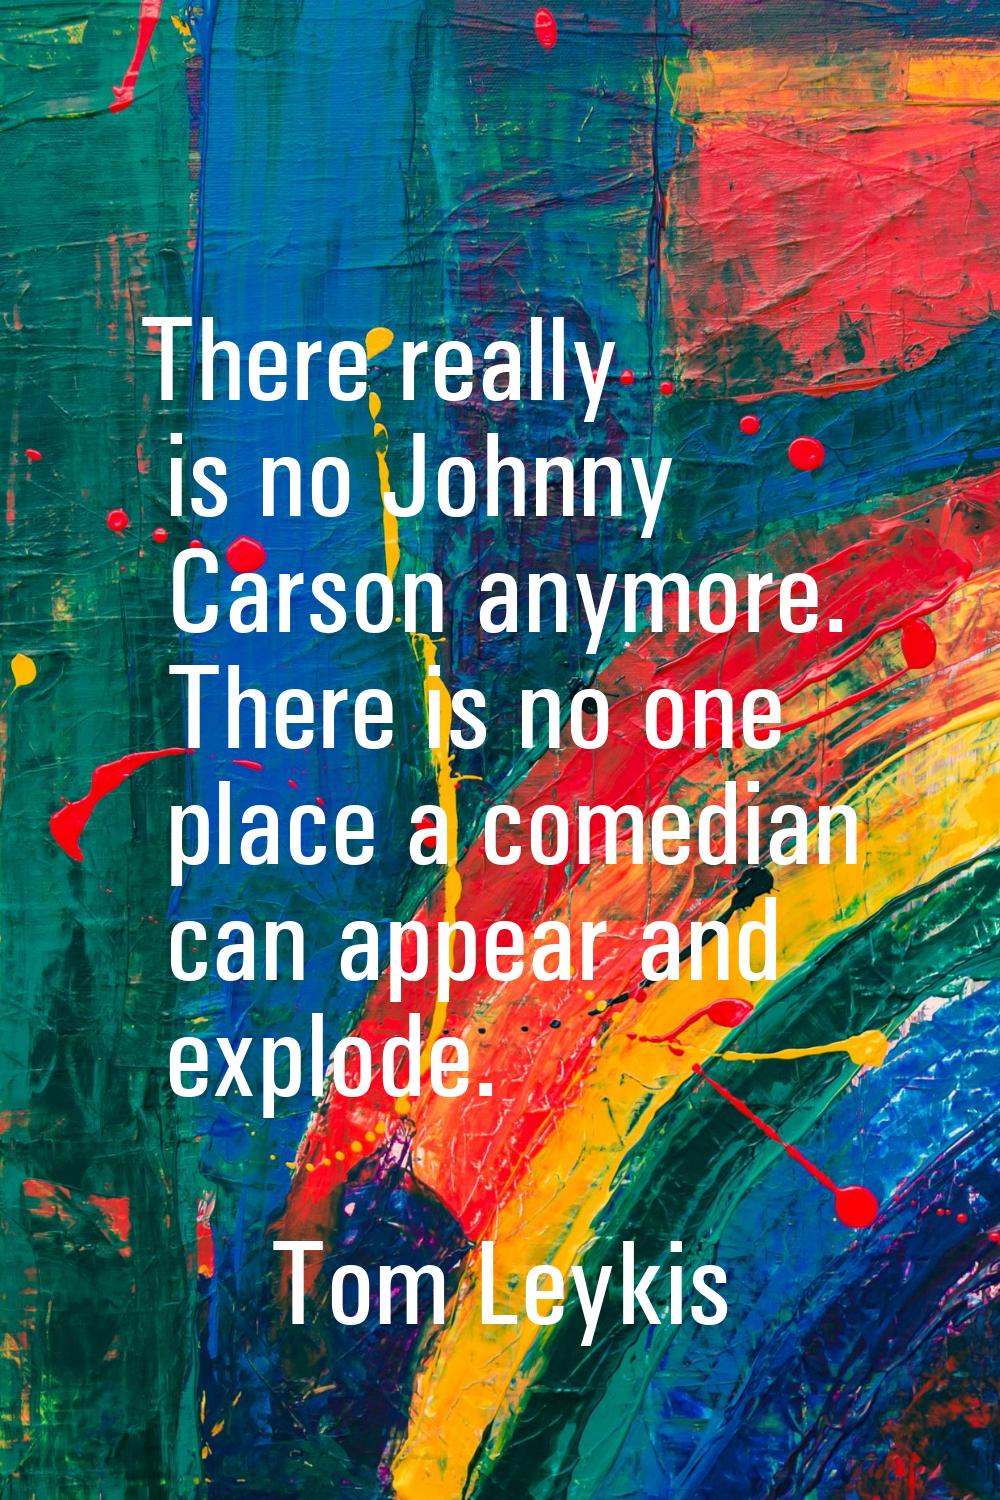 There really is no Johnny Carson anymore. There is no one place a comedian can appear and explode.